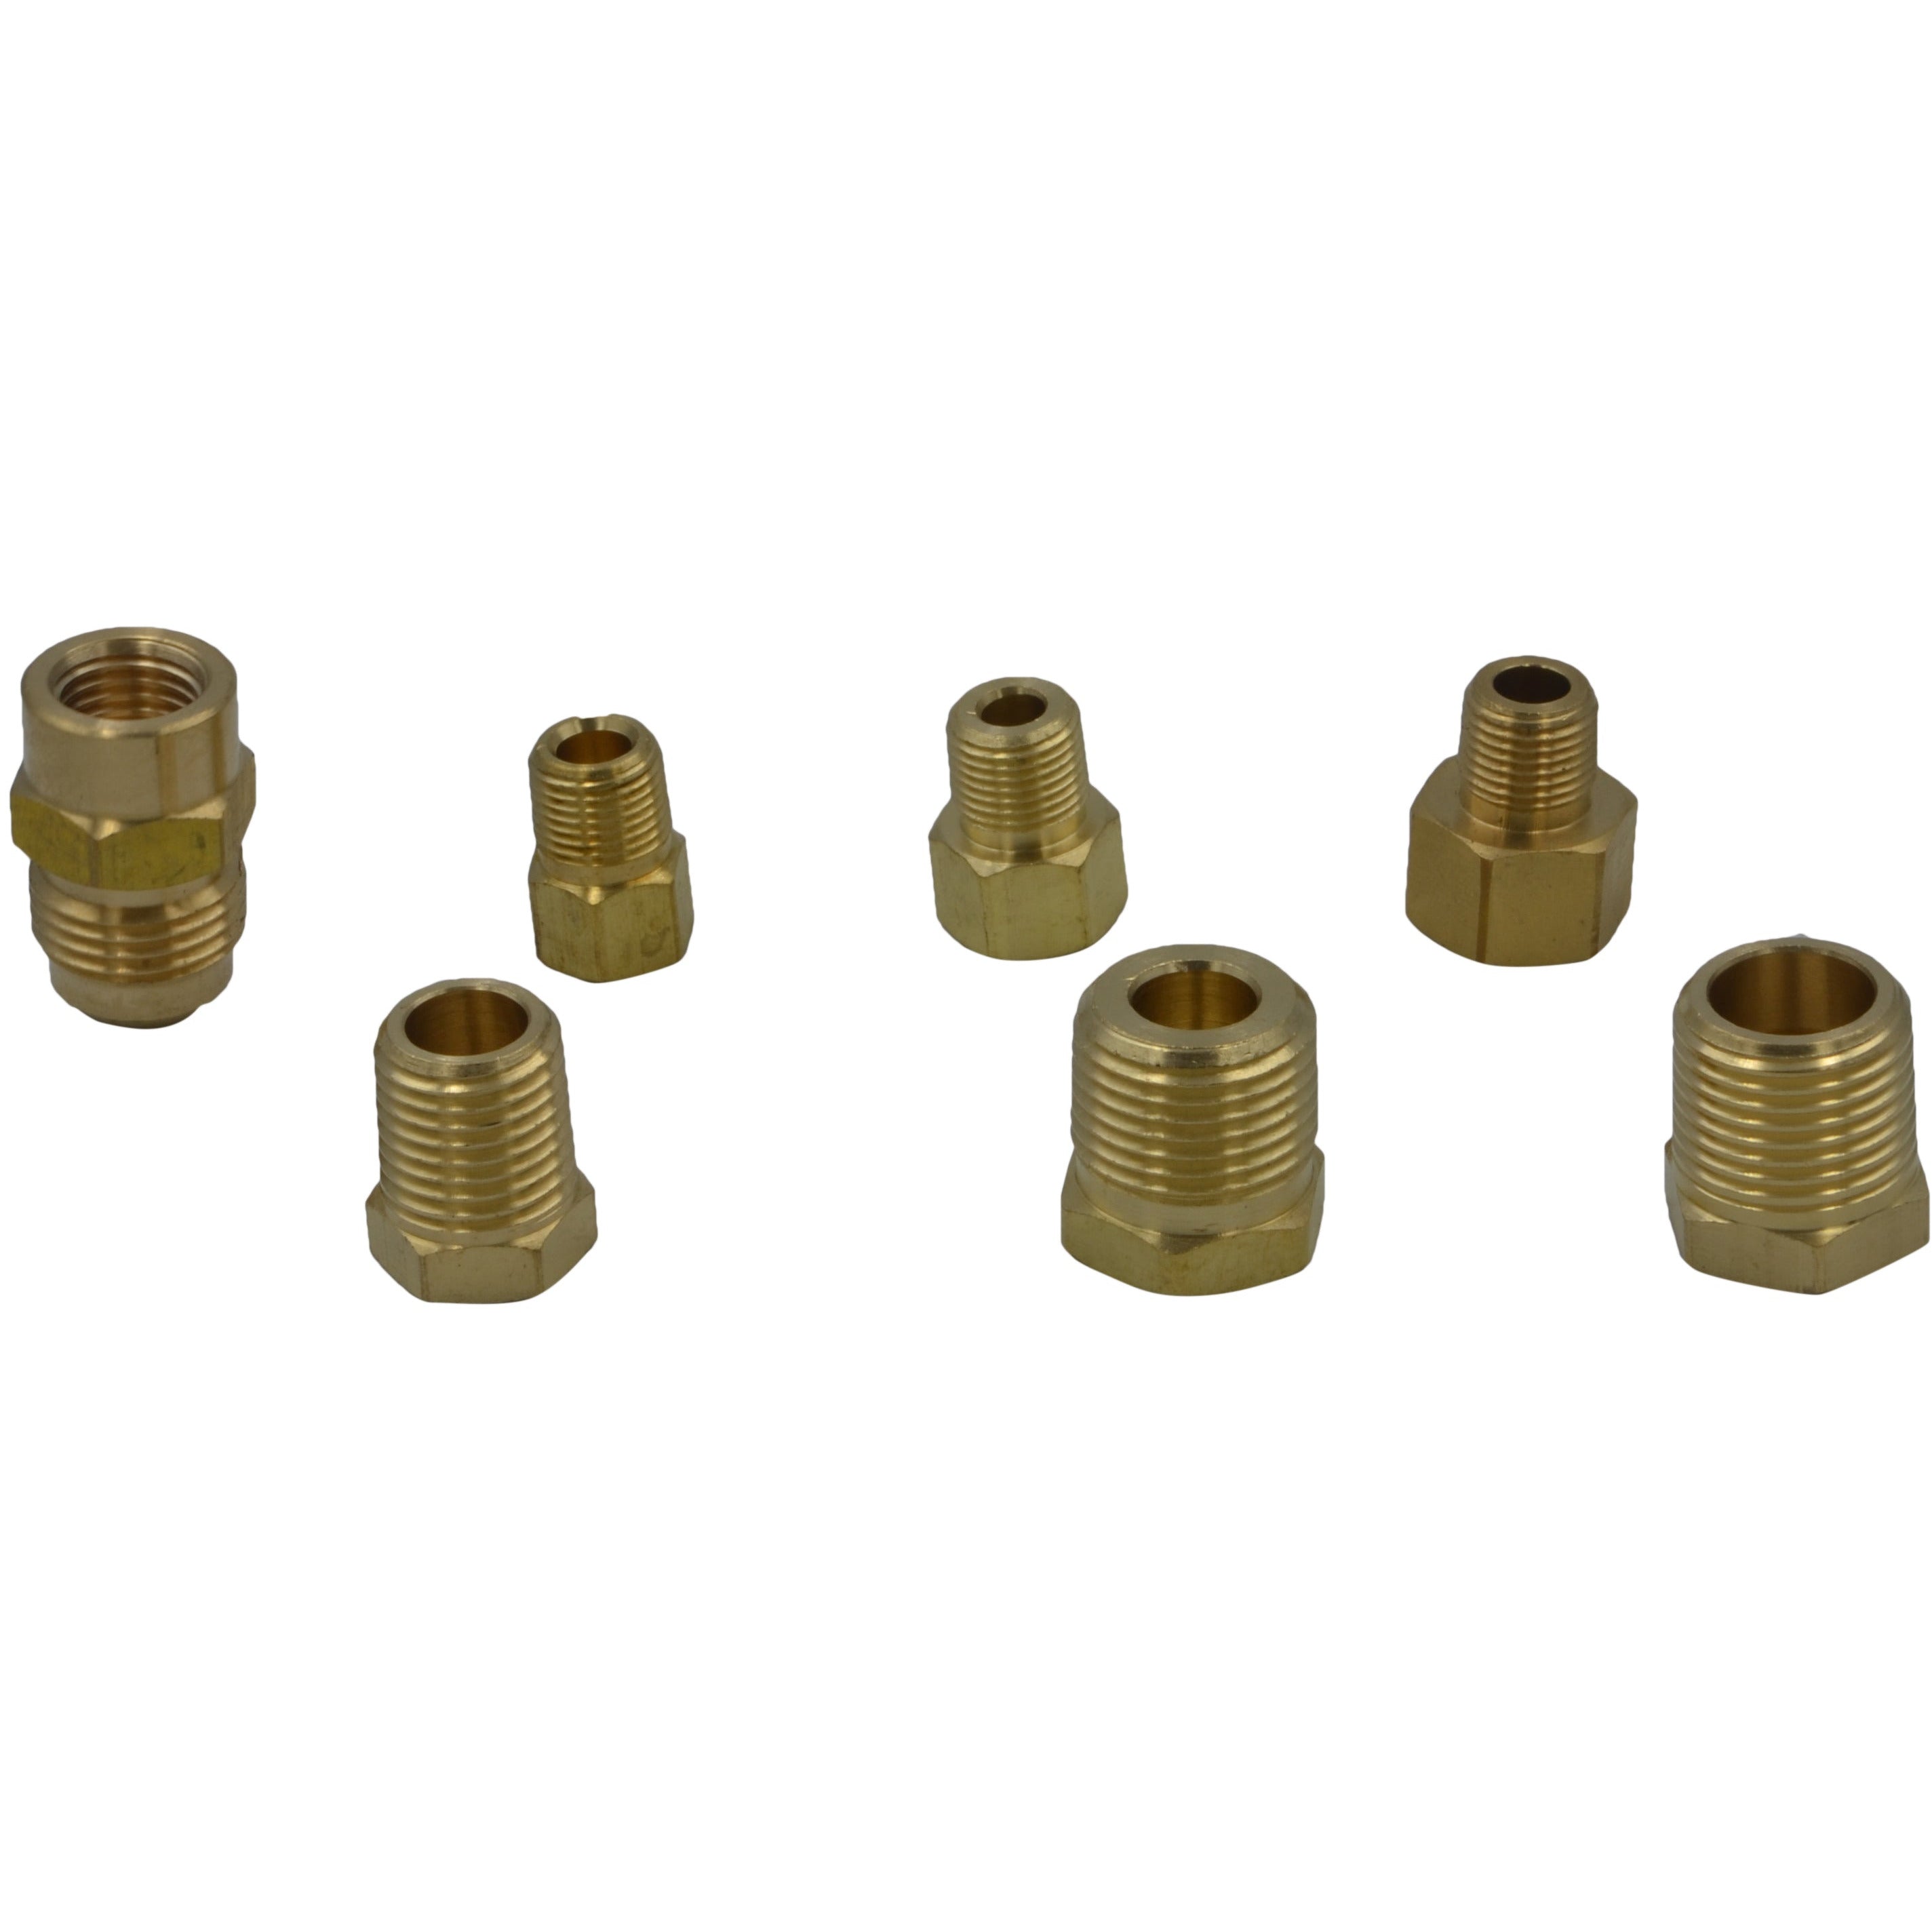 43 Pc Brass fitiings adaptors assortment grab kit, SAE NPT reducers and T pieces